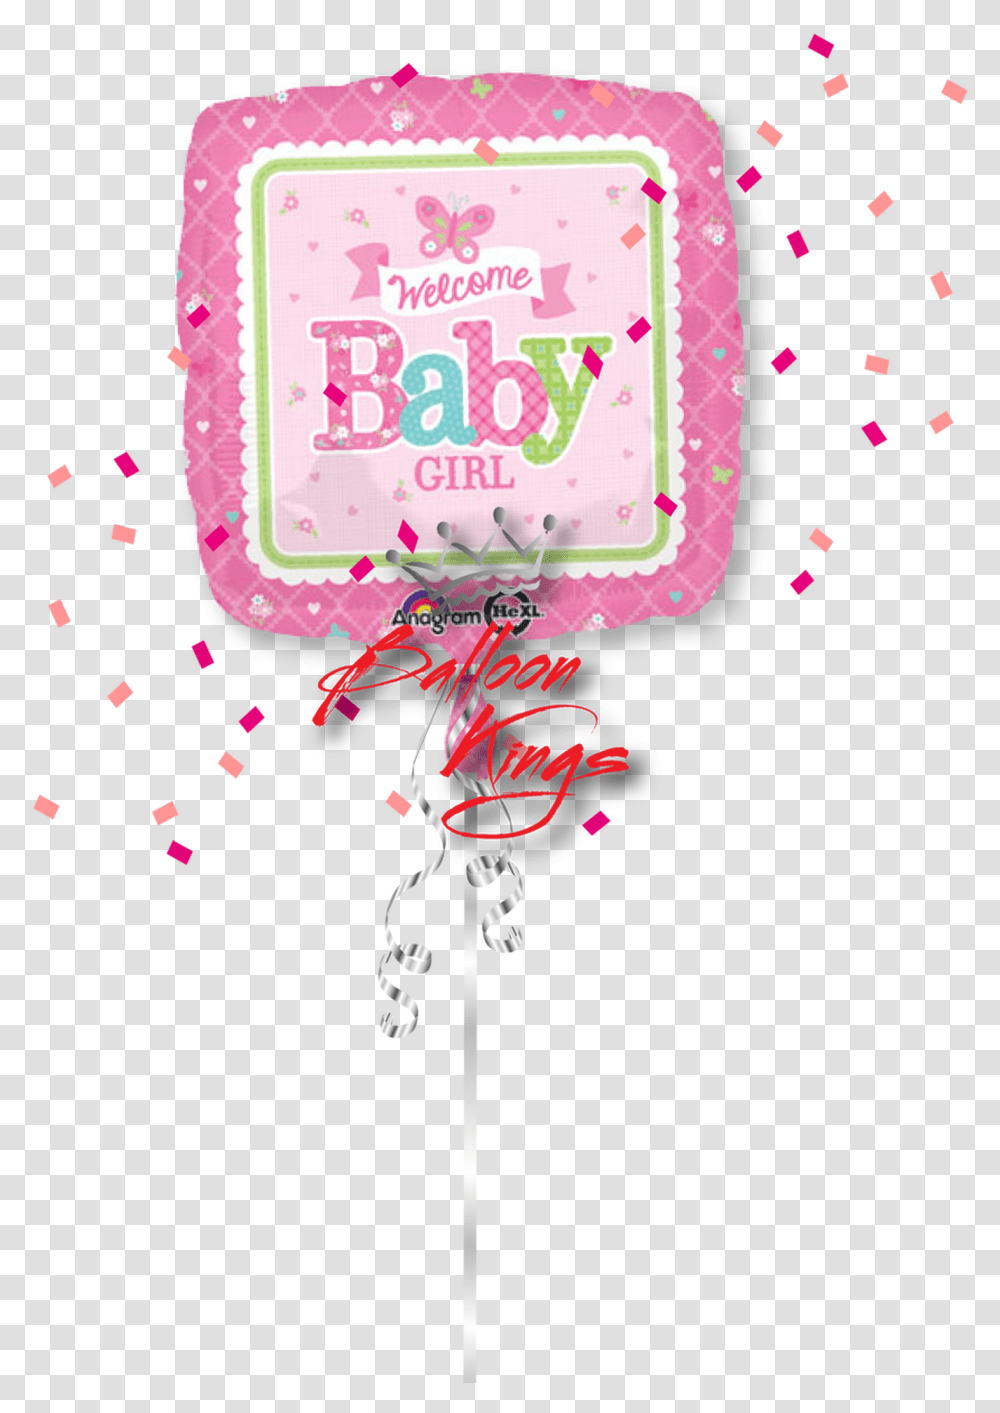 Welcome Baby Girl Butterfly Graphic Design, Paper, Confetti, Rattle, Cake Transparent Png